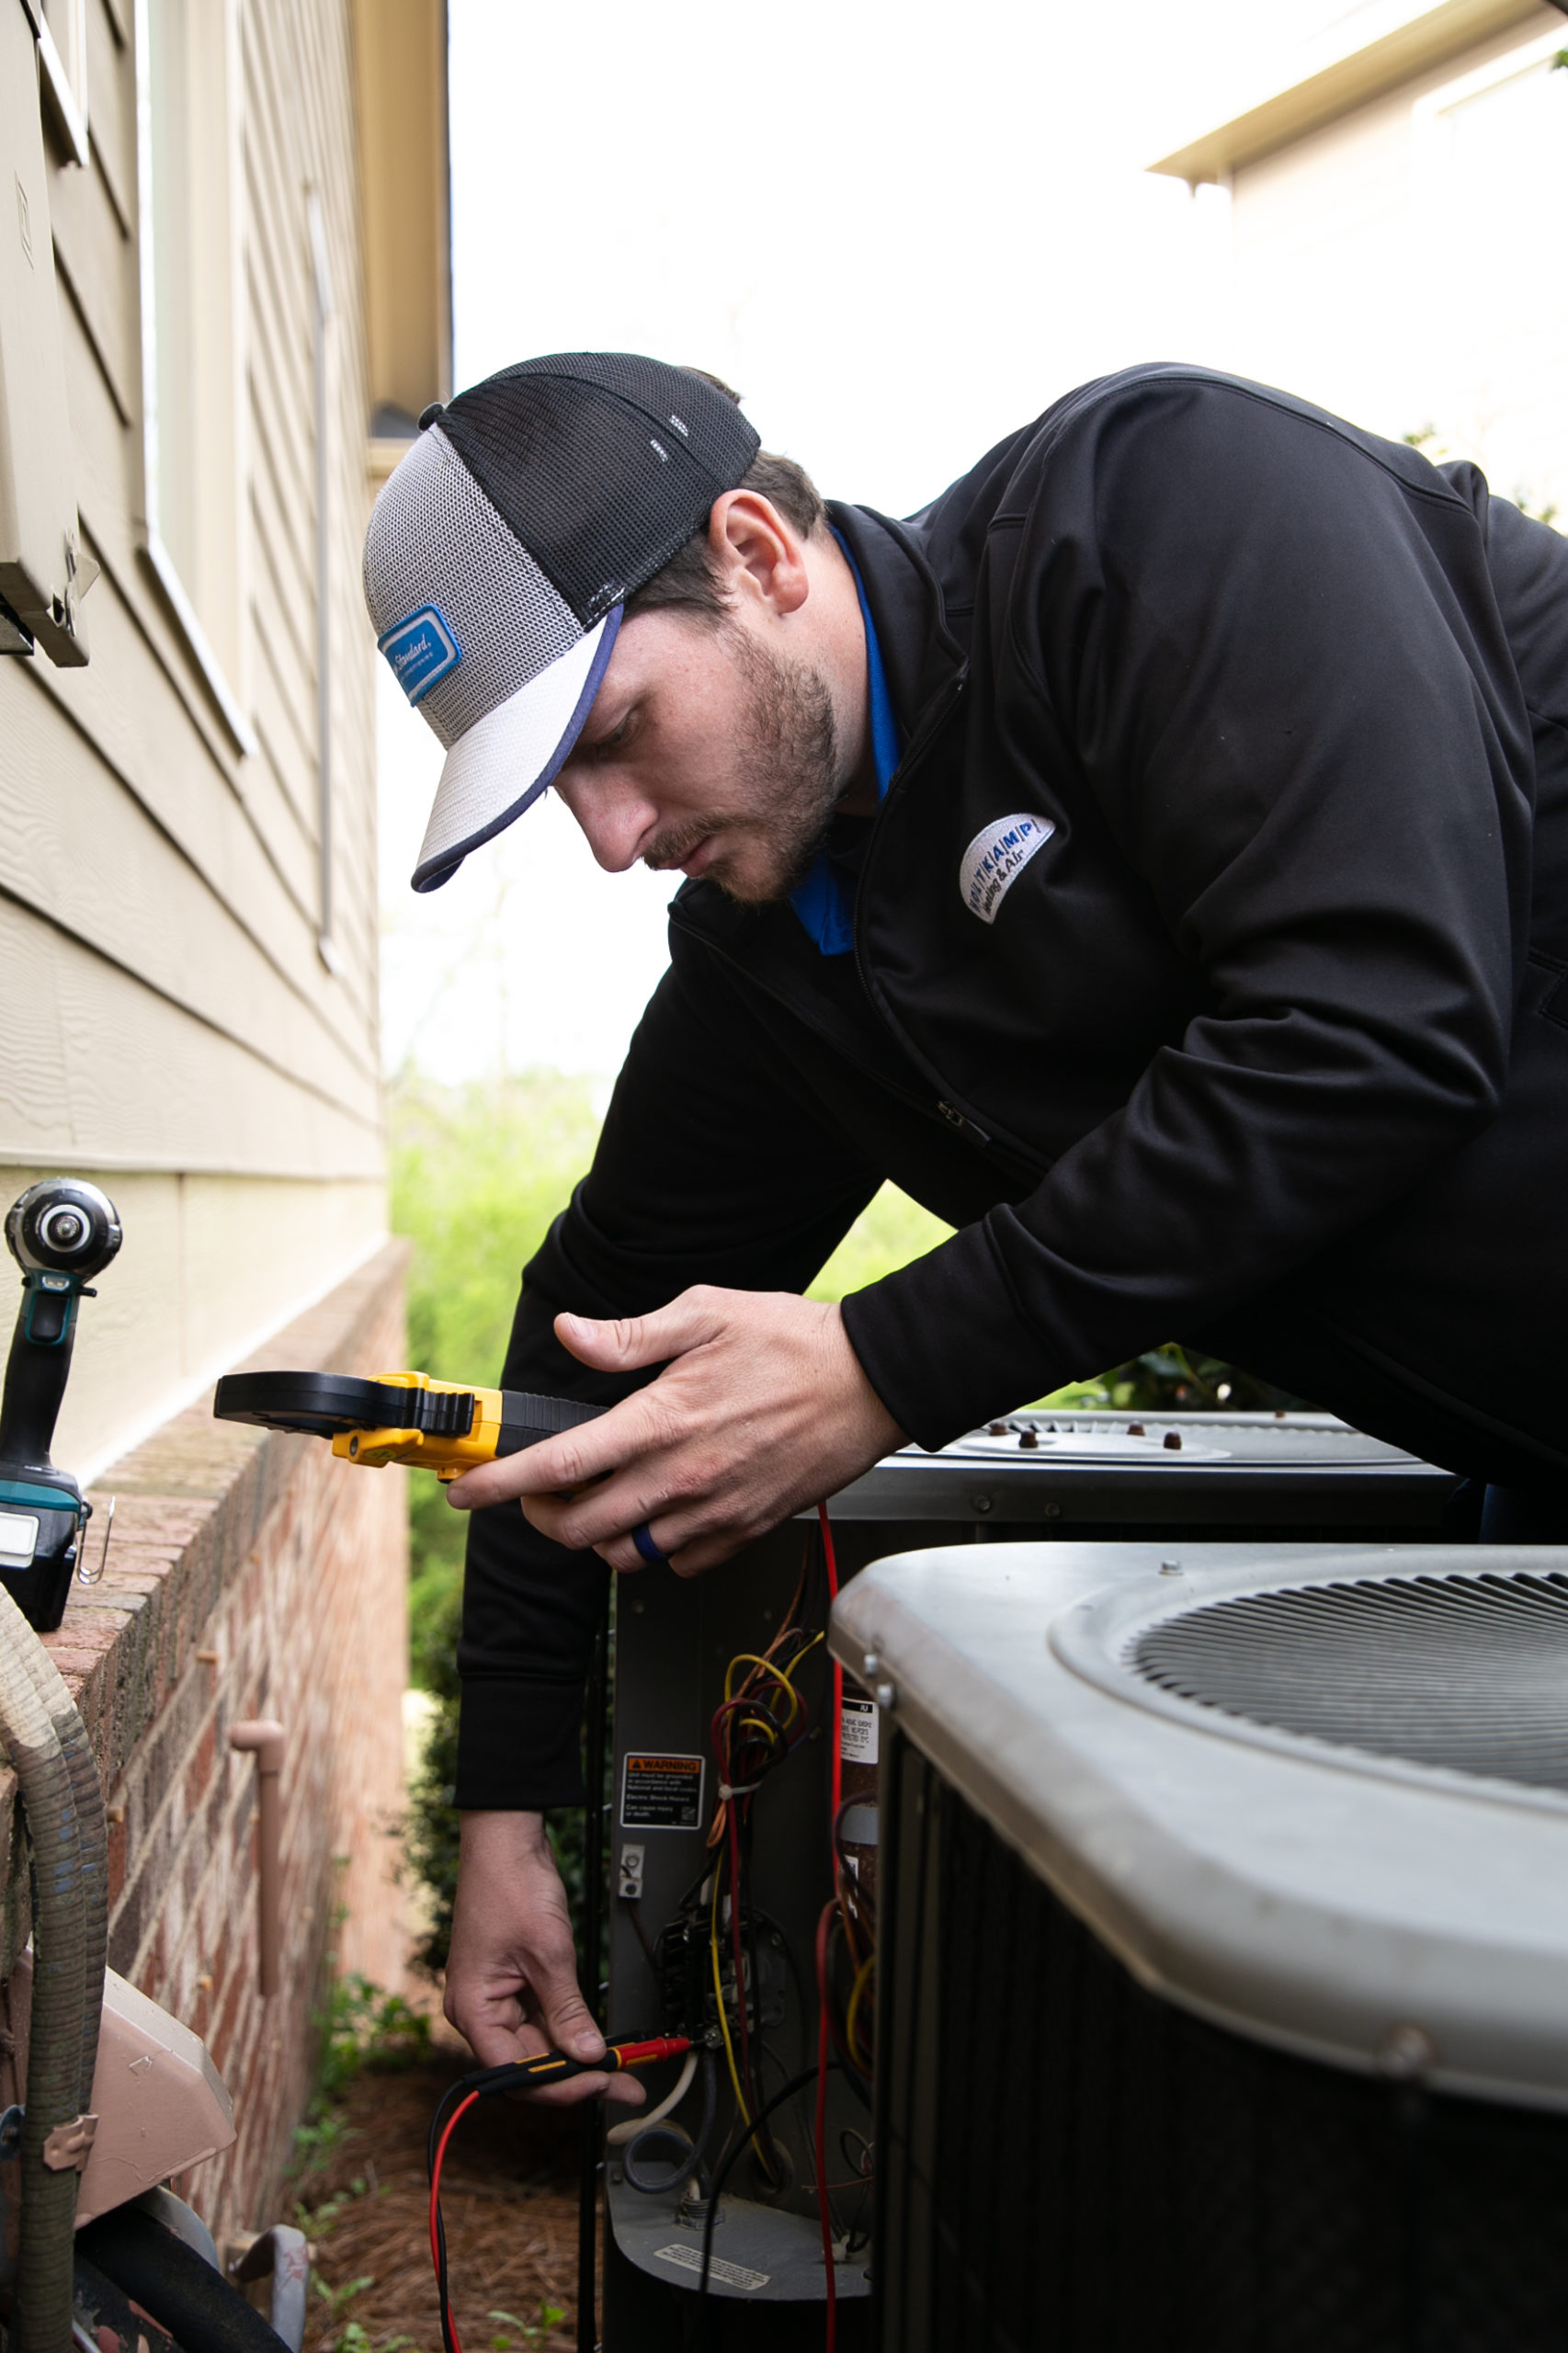 AC Maintenance 101: Basic Tips on How to Maintain Your AC